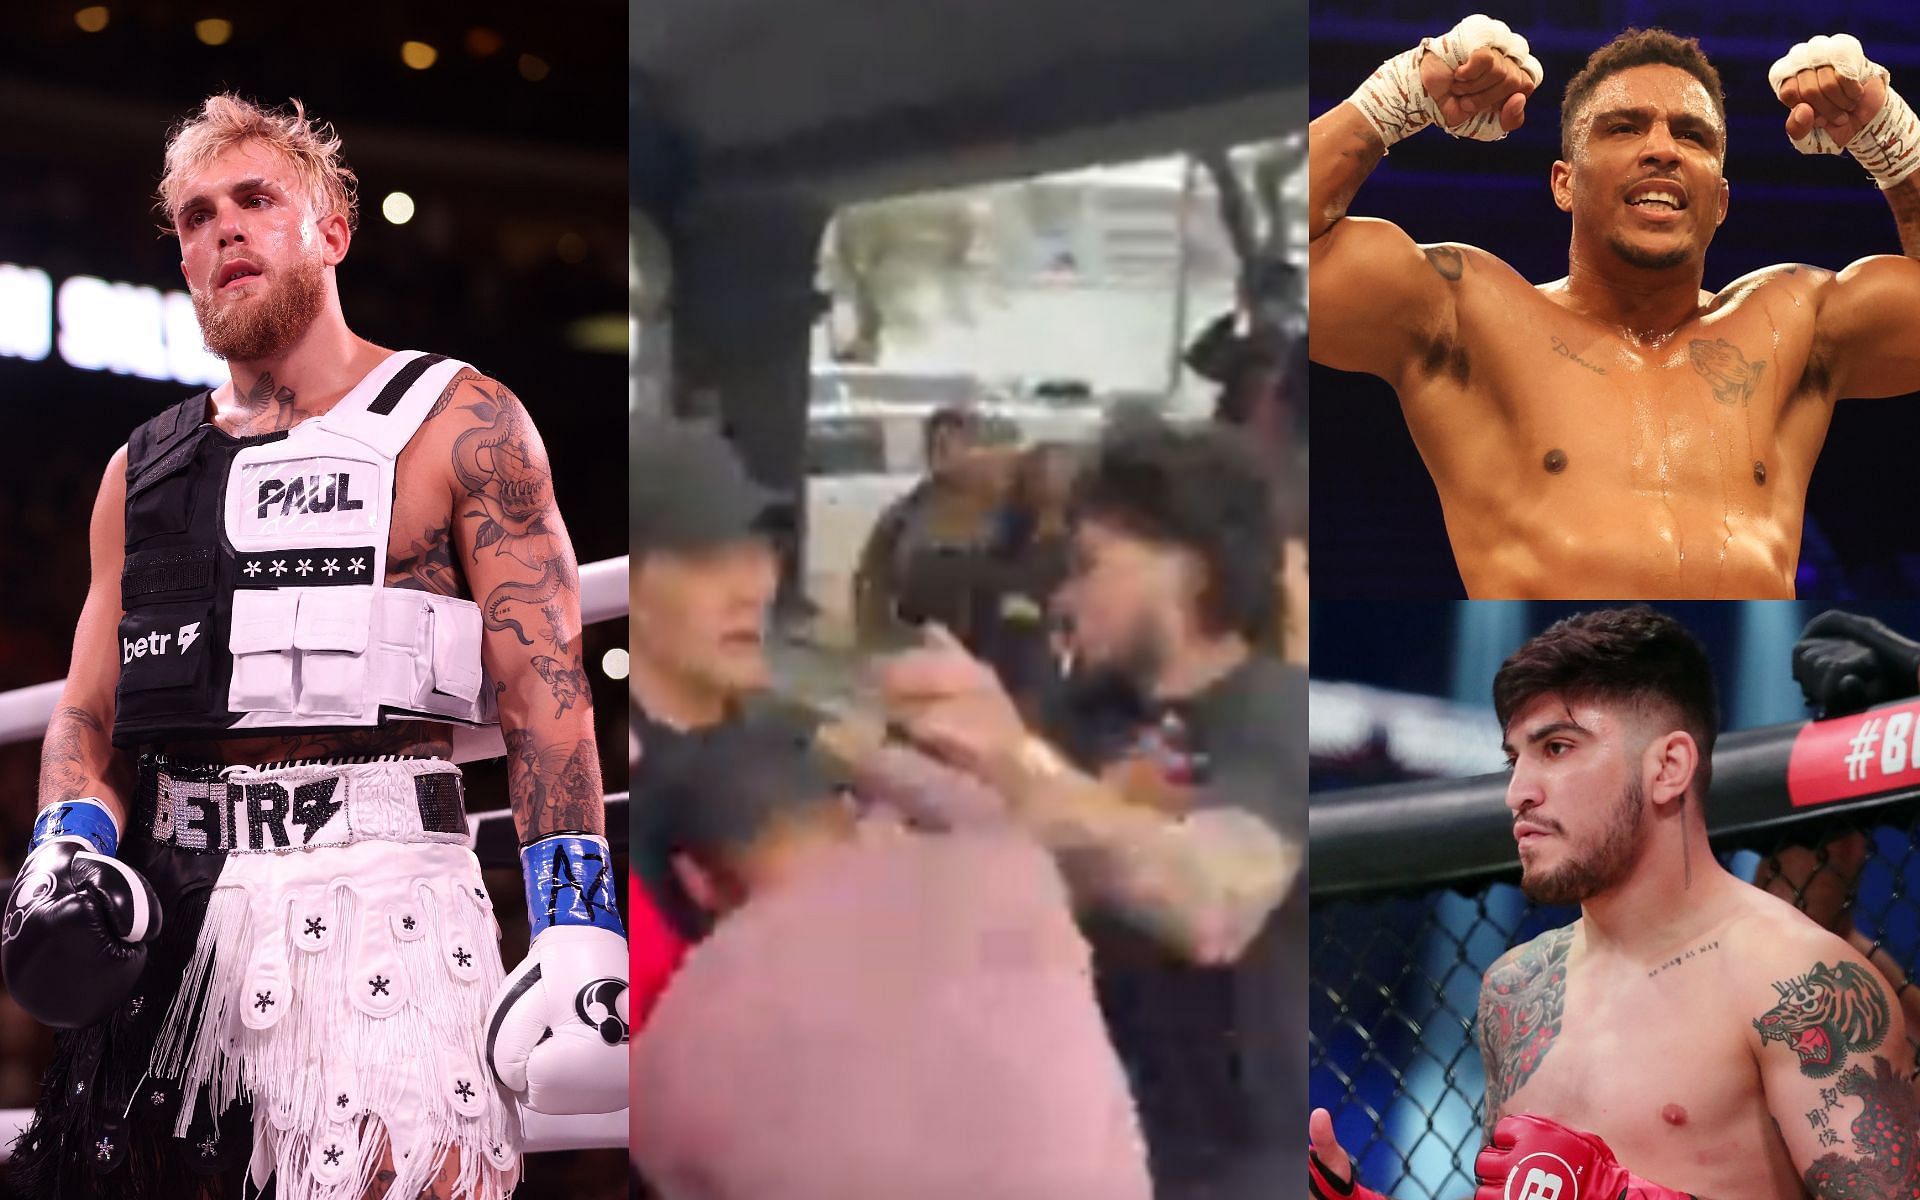 Jake Paul (left), Anthony Taylor punching Dillon Danis (center), Taylor (top right), and Danis (bottom right). [Images courtesy: left image and top right from Getty Images, center image from Twitter @IFLTV and bottom right image from USA Today]